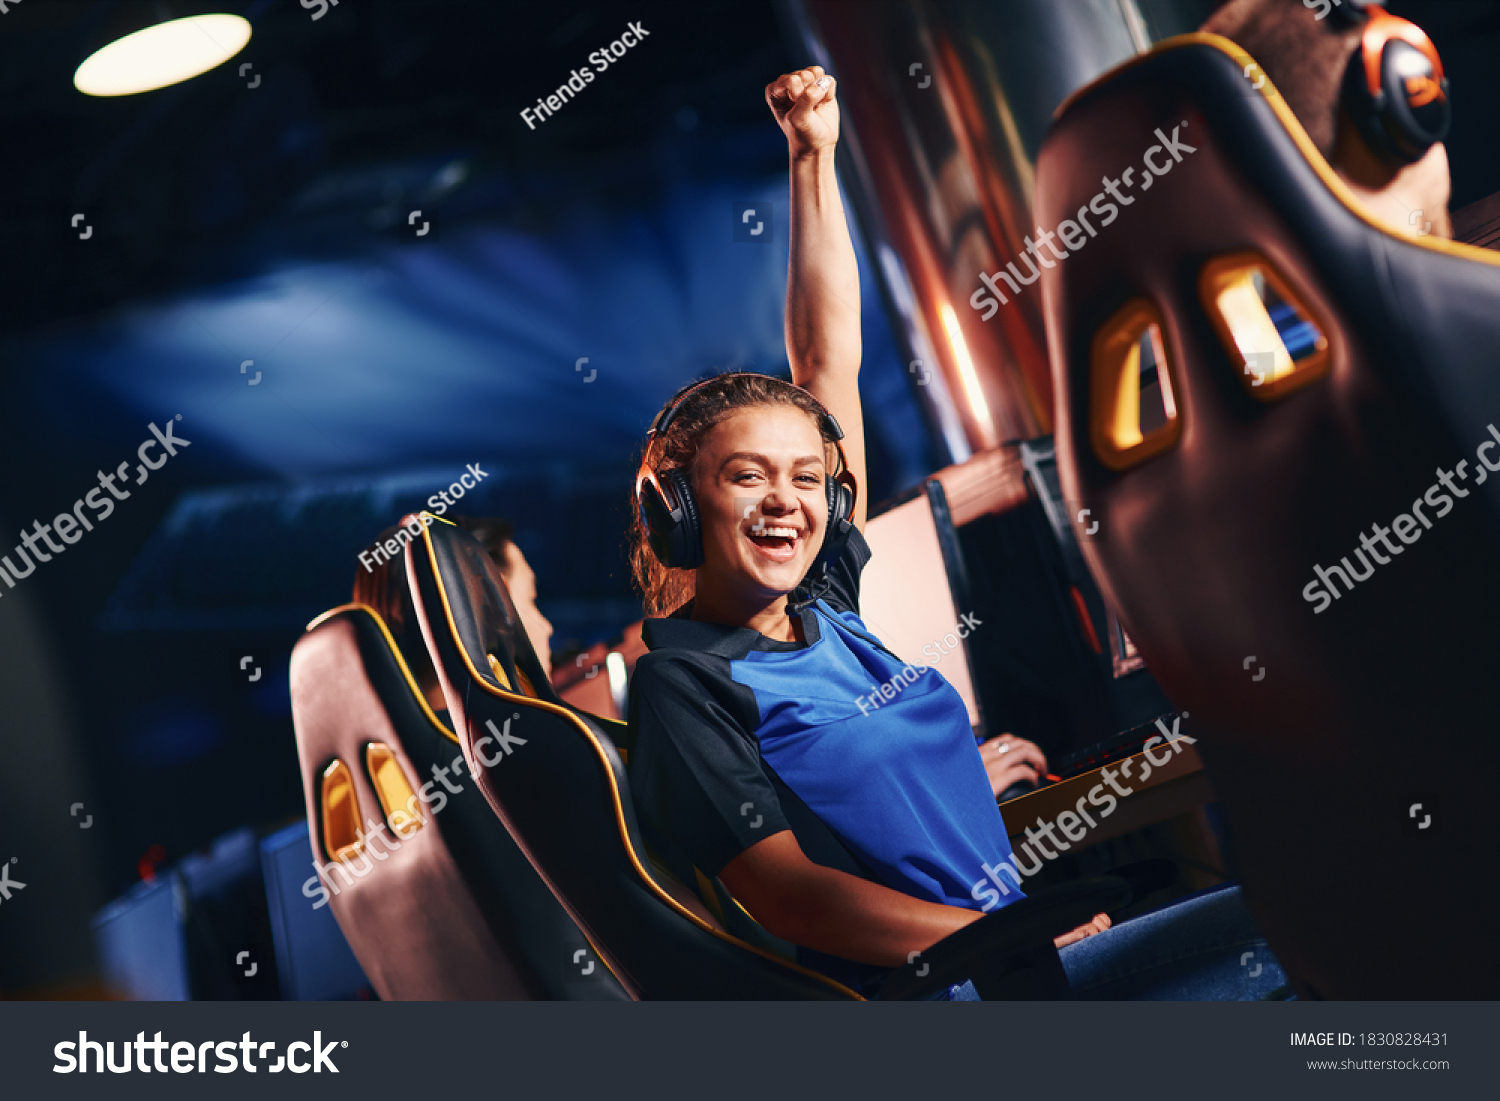 Young happy mixed race girl, female cybersport gamer raising hand up and smiling at camera while participating in eSport tournament #1830828431